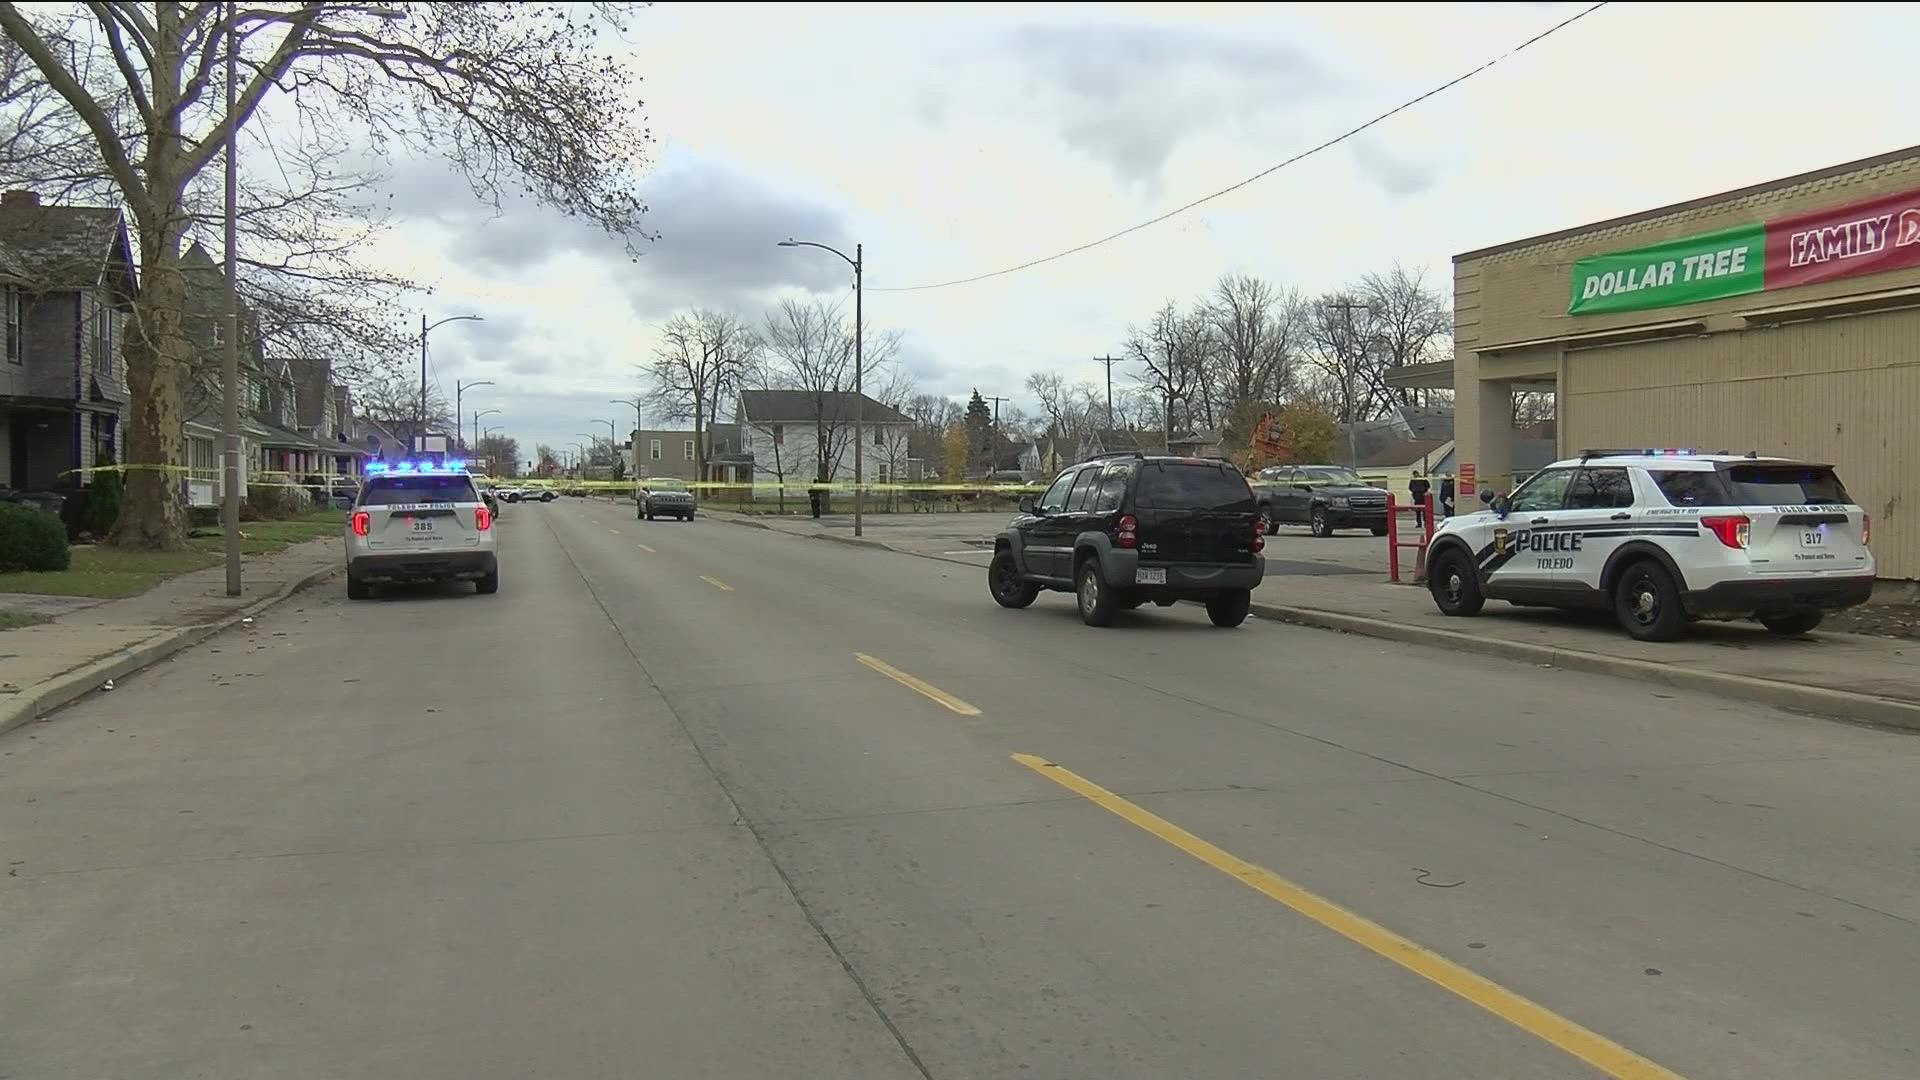 A person was shot Monday afternoon near the parking lot of Dollar Tree in the 600 block of East Broadway Street. The suspect fled the scene, Toledo police claim.